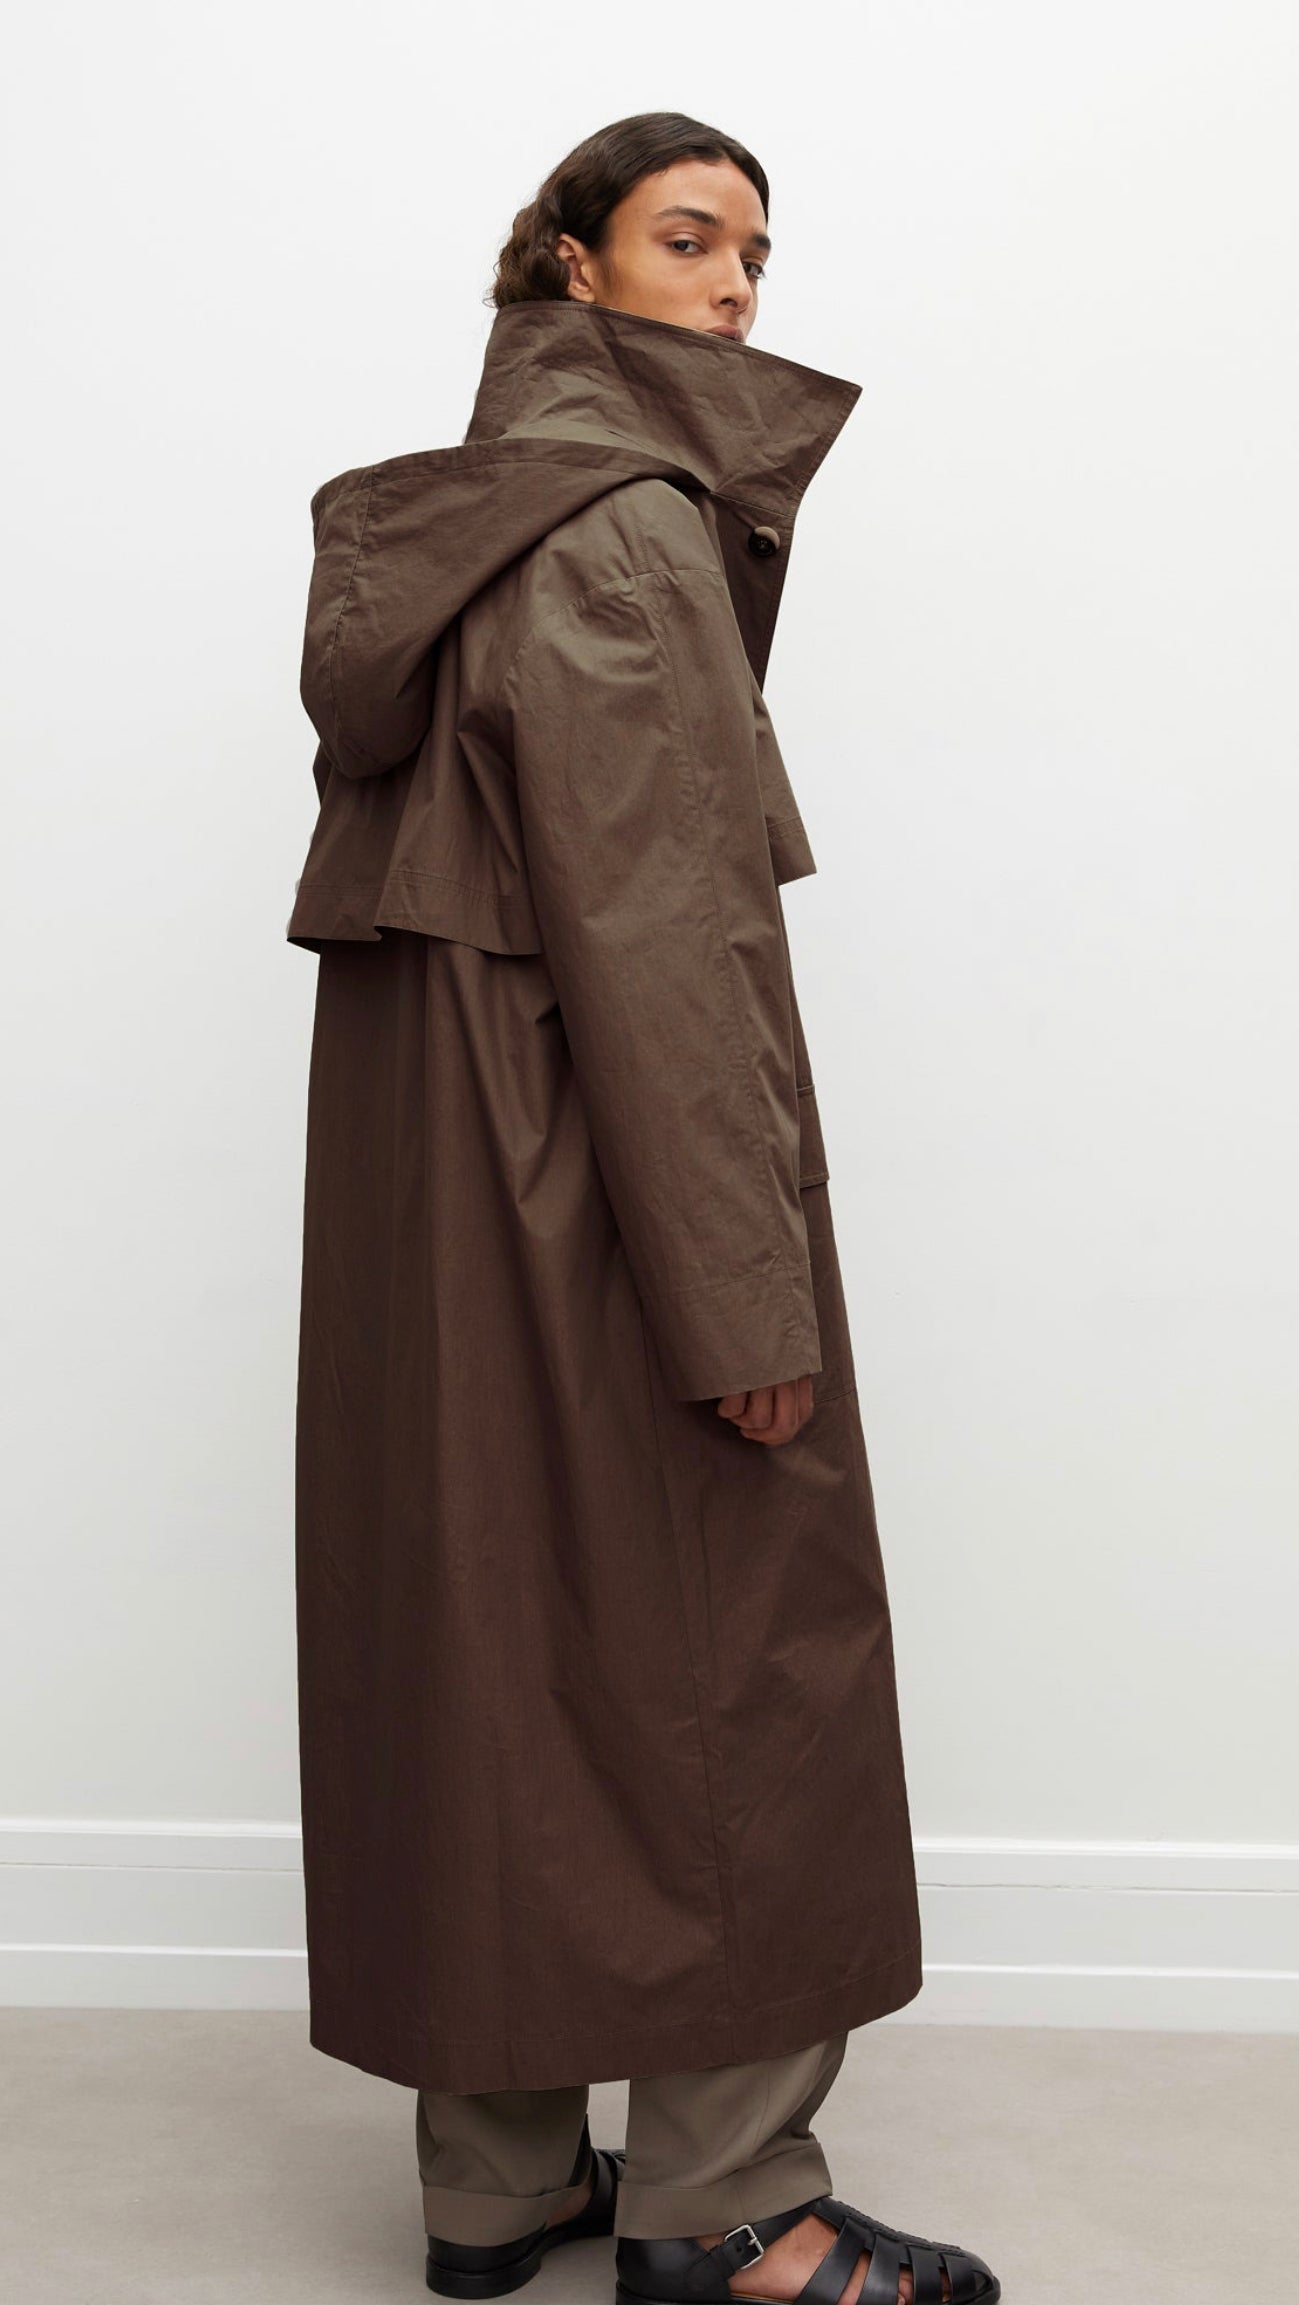 Rohe Brown Hooded Trench Coat - NWT